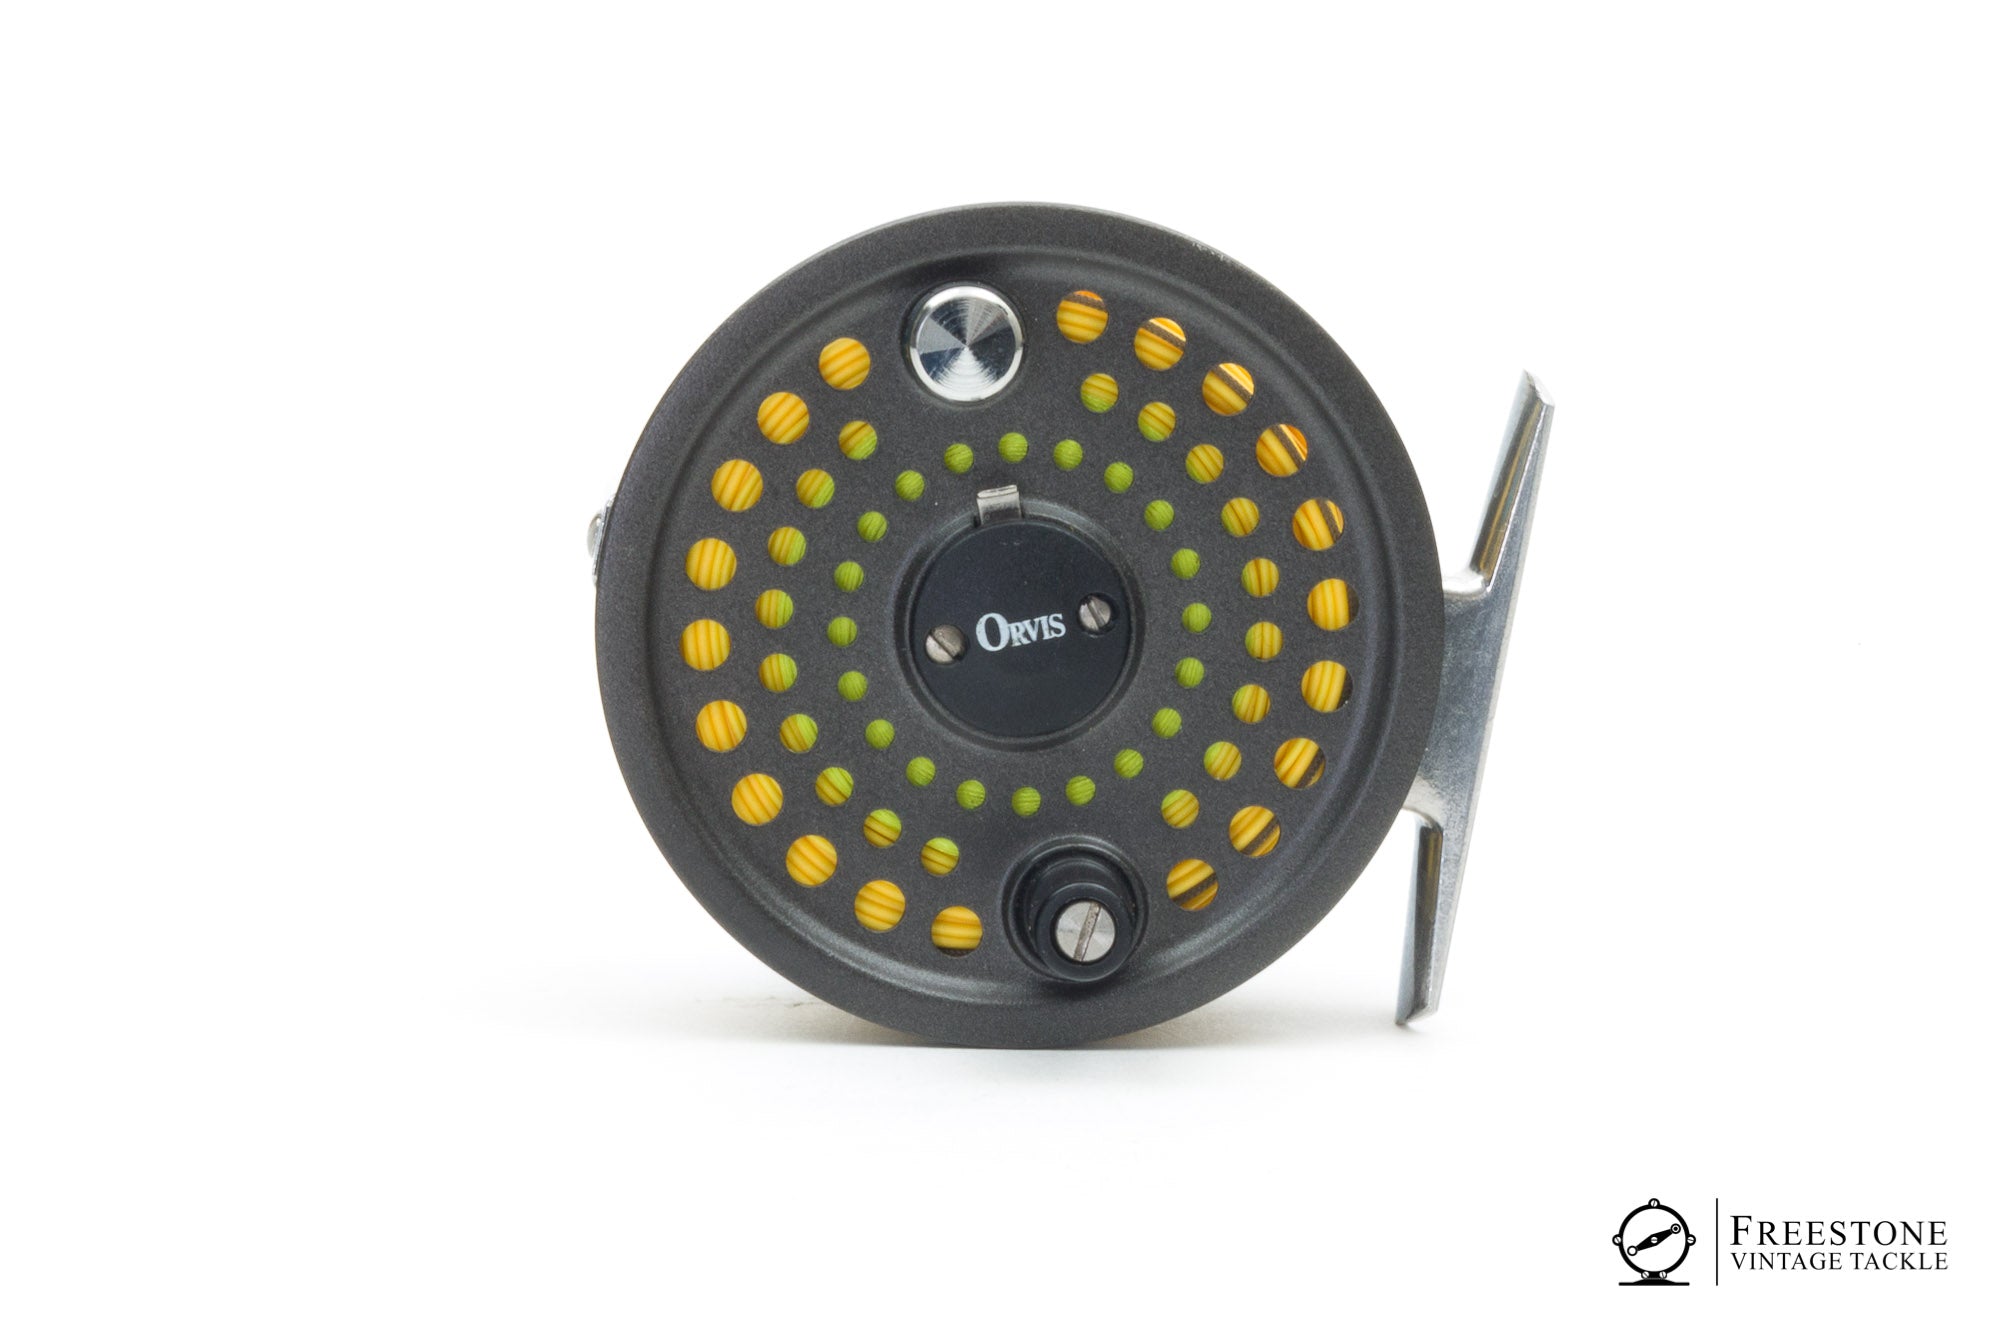 106: An Orvis Battenkill Disc 8/9 reel, made in England. Unused, as new, in  Orvis box. With 3 spare spools.